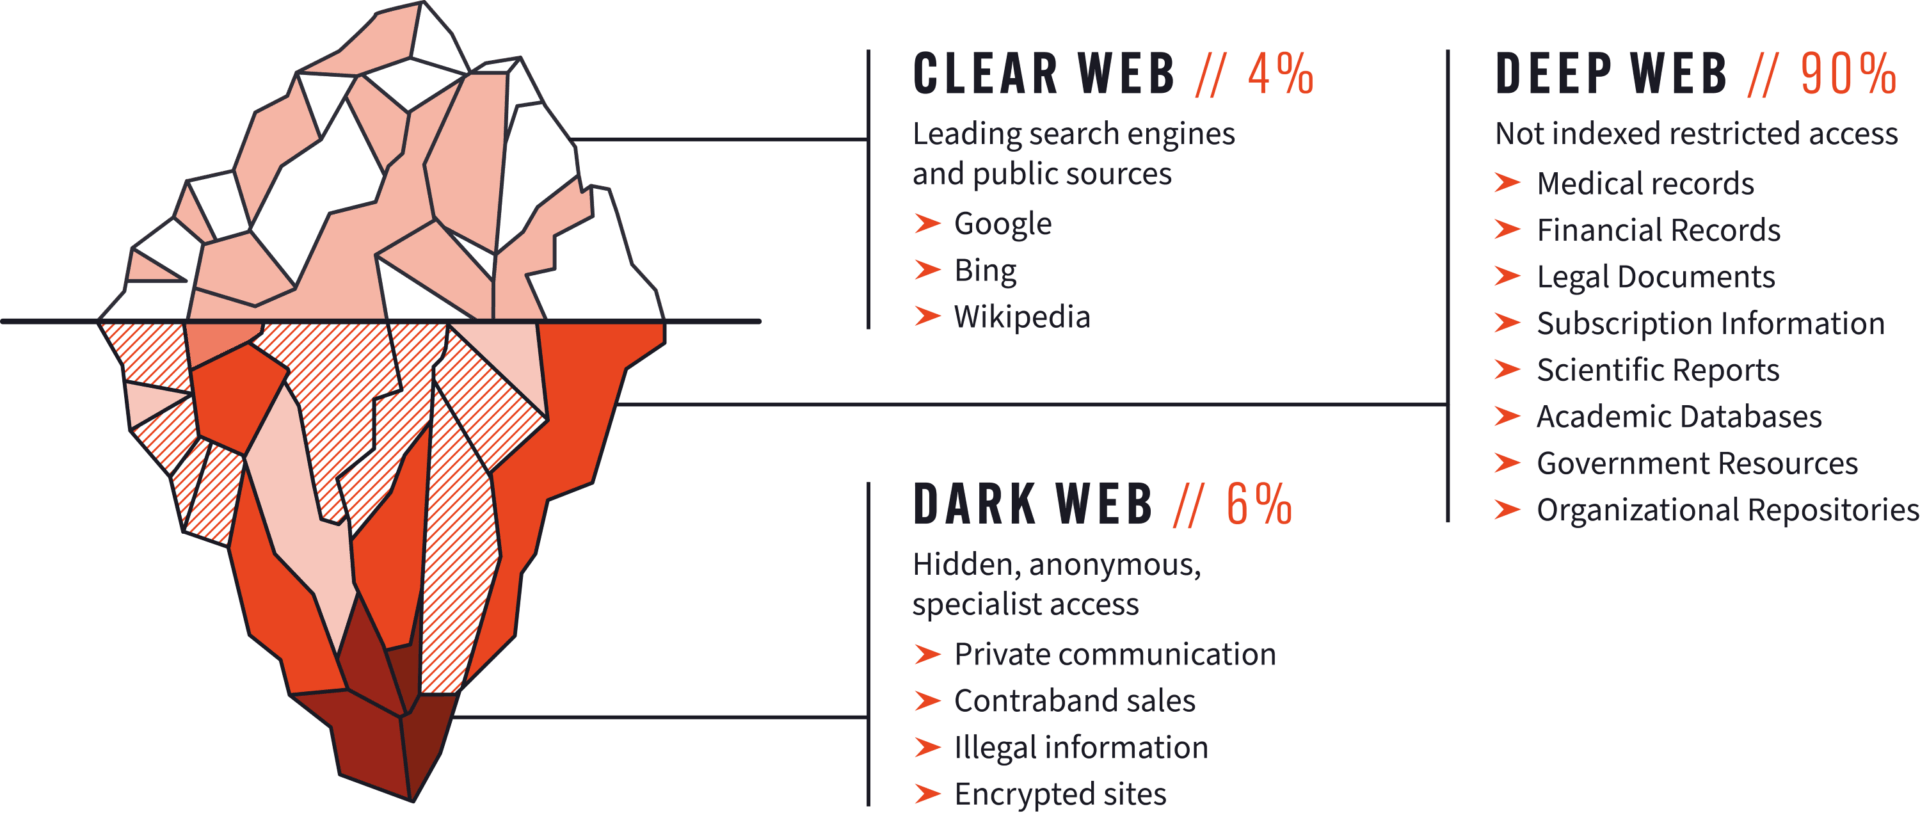 Visualization of the clear, deep, and dark web.